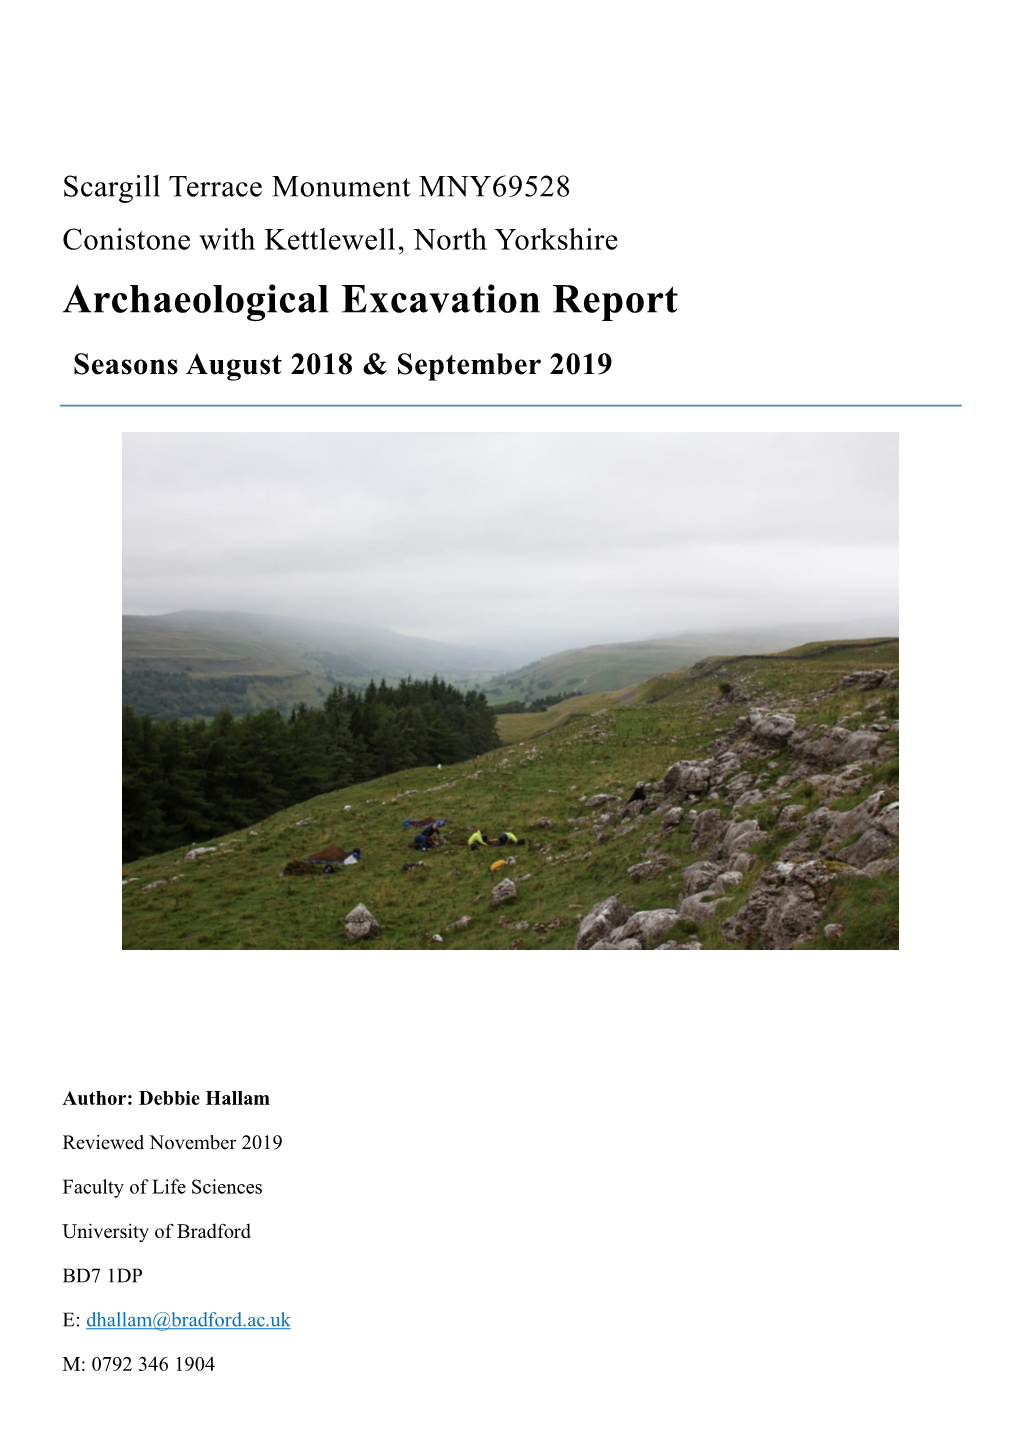 Archaeological Excavation Report Seasons August 2018 & September 2019